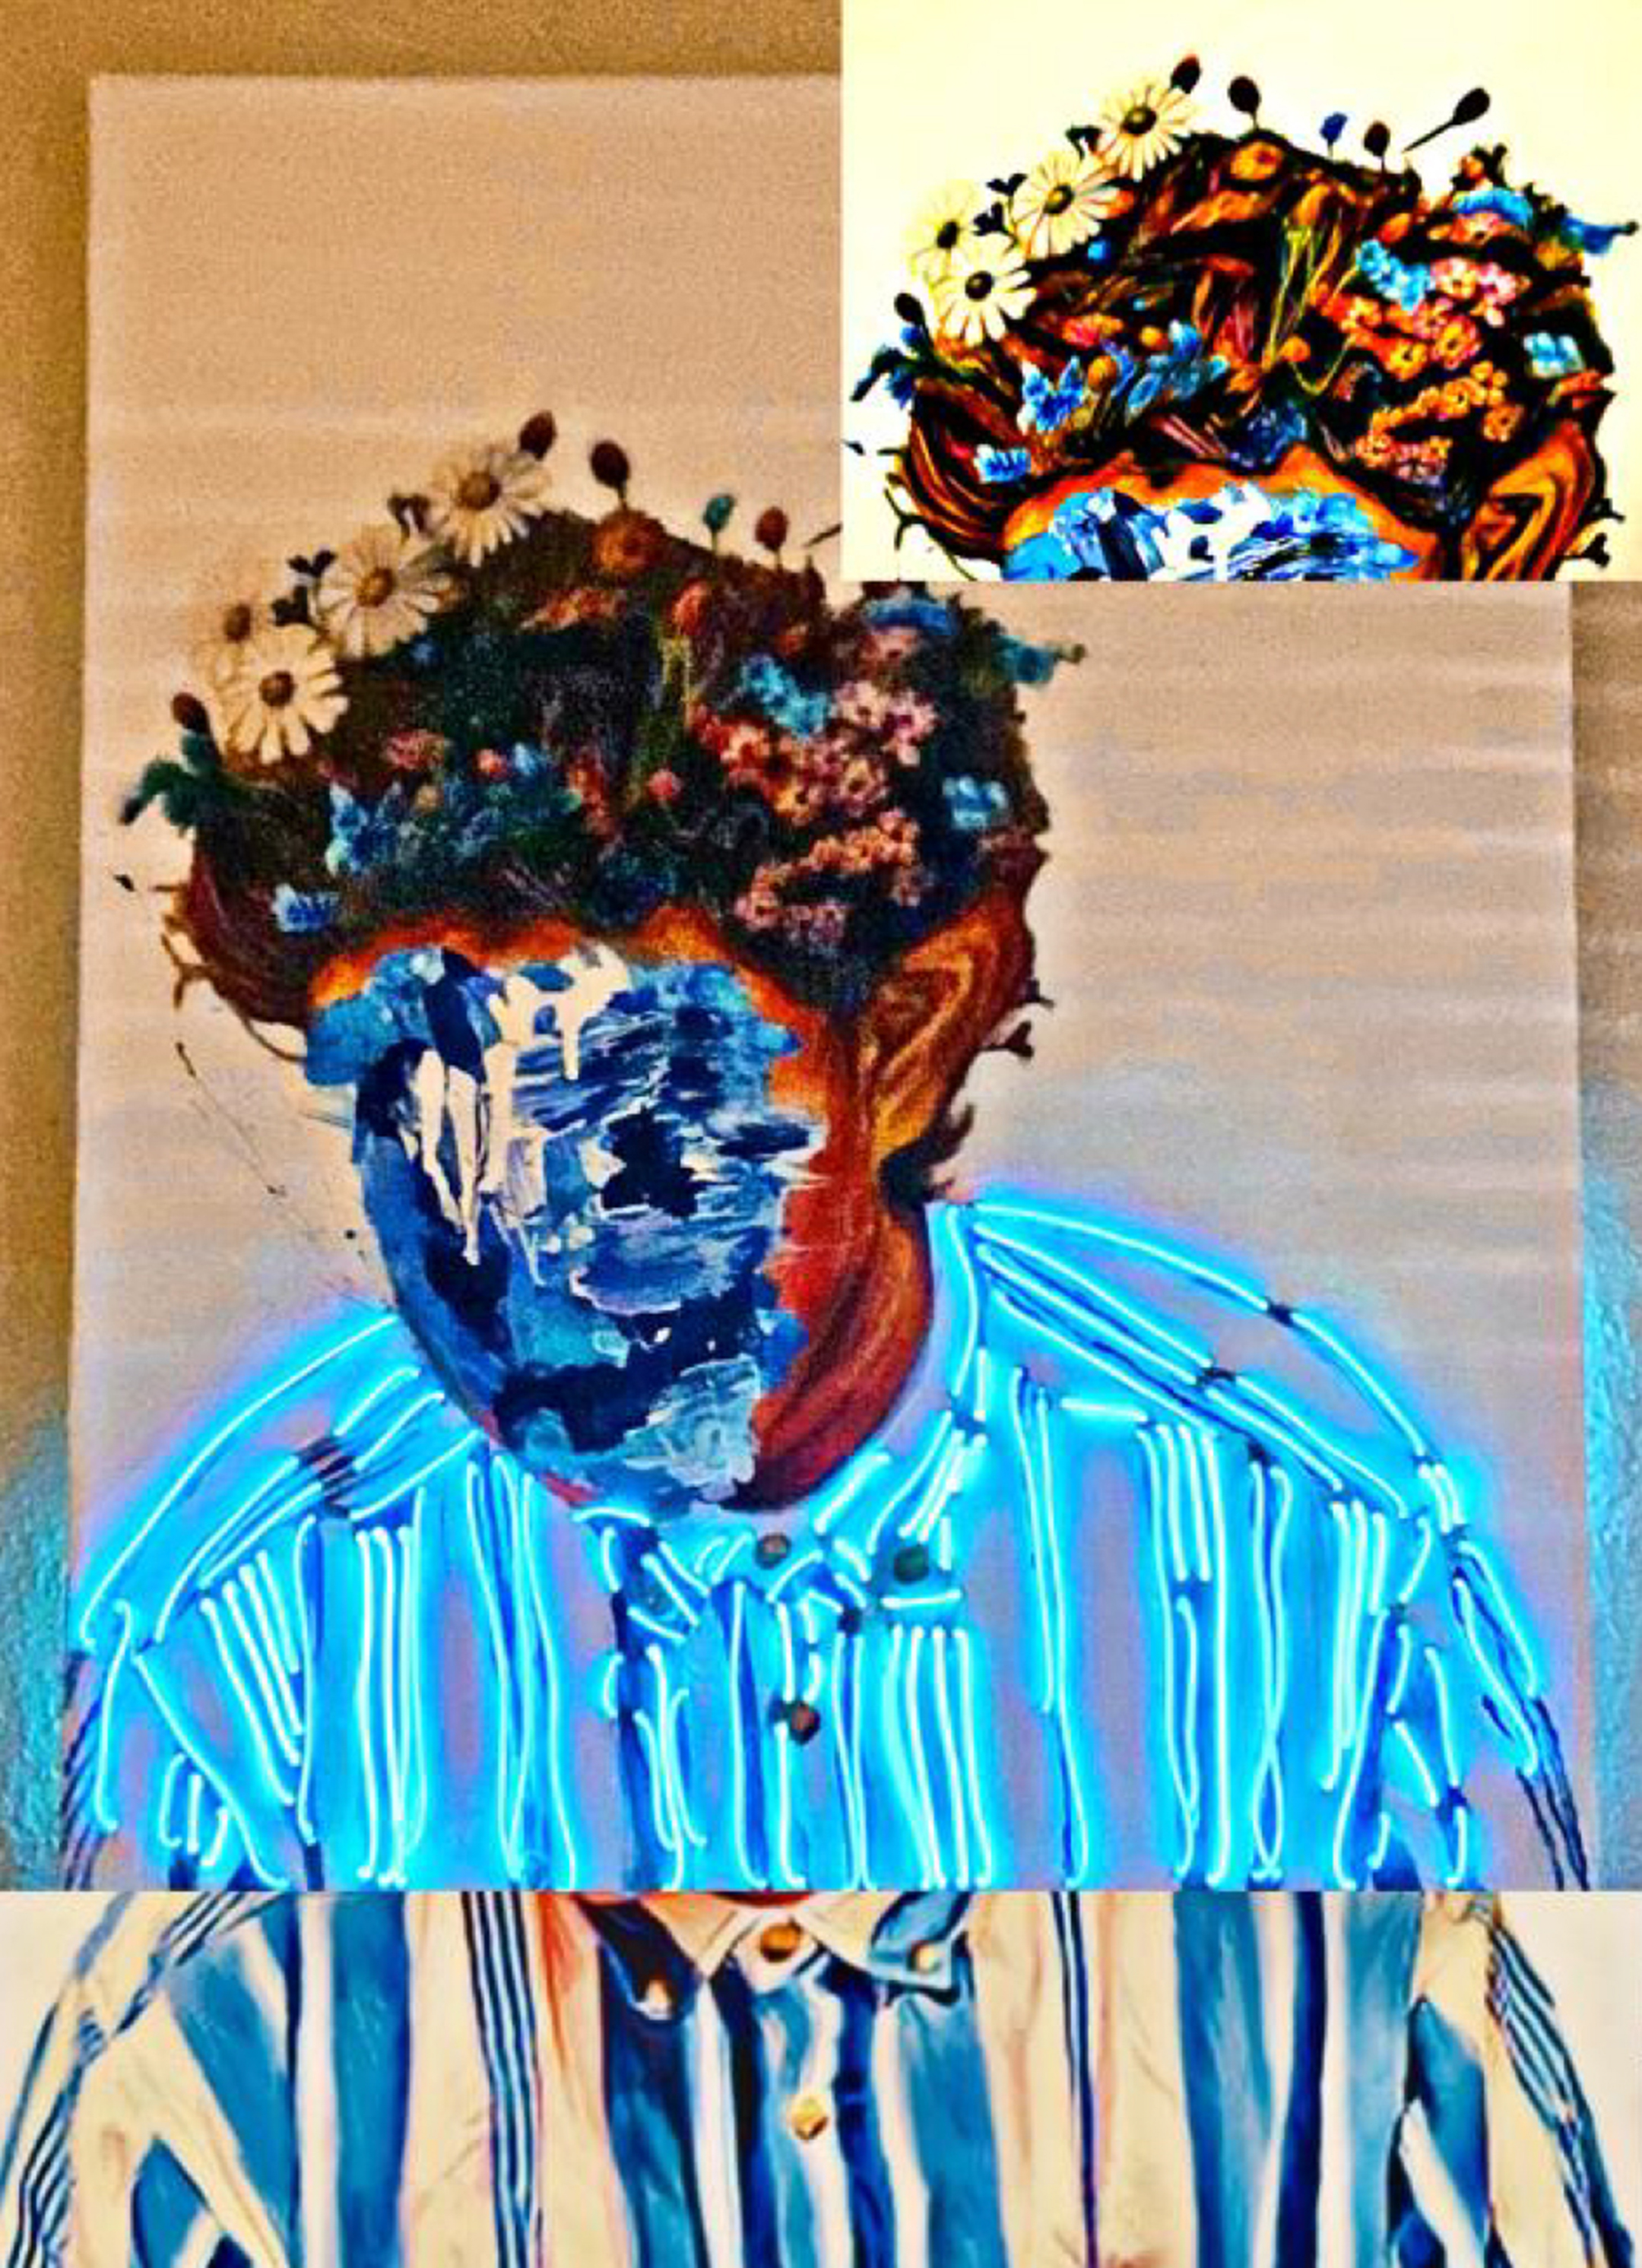 Painting of a young person in an electric blue shirt with their face obscured with blue and black paint